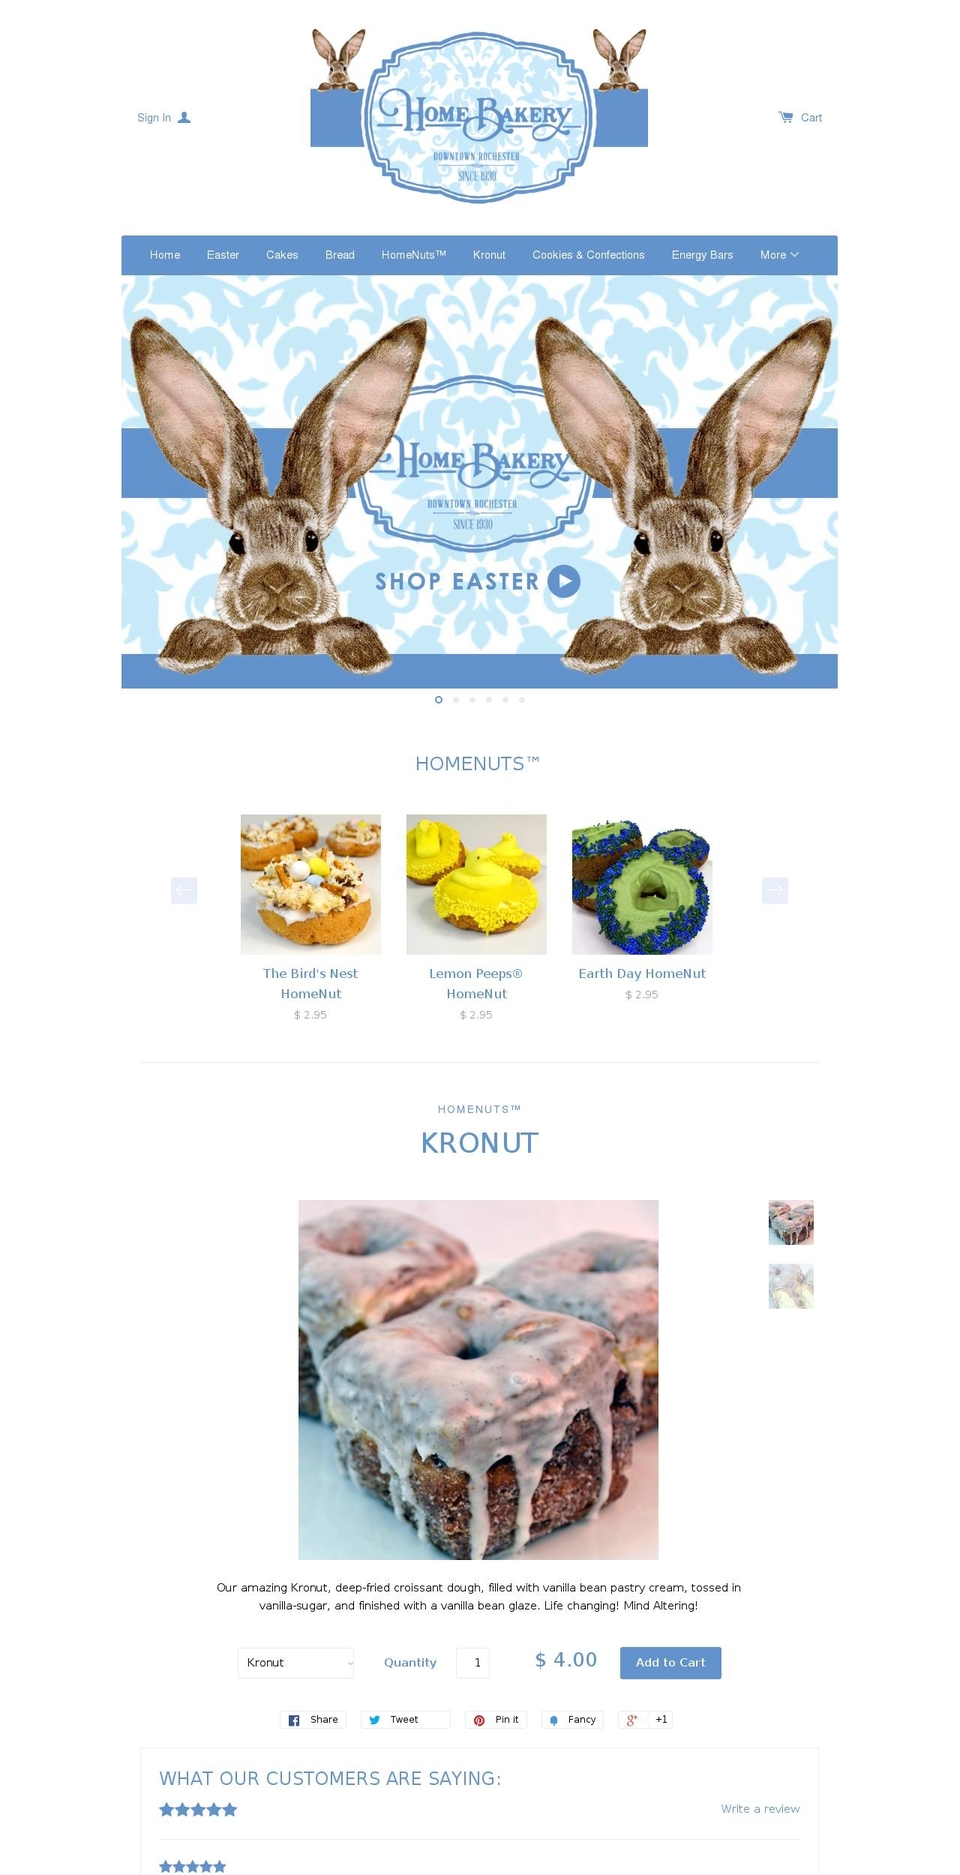 Bakery Shopify theme site example thehomebakery.com